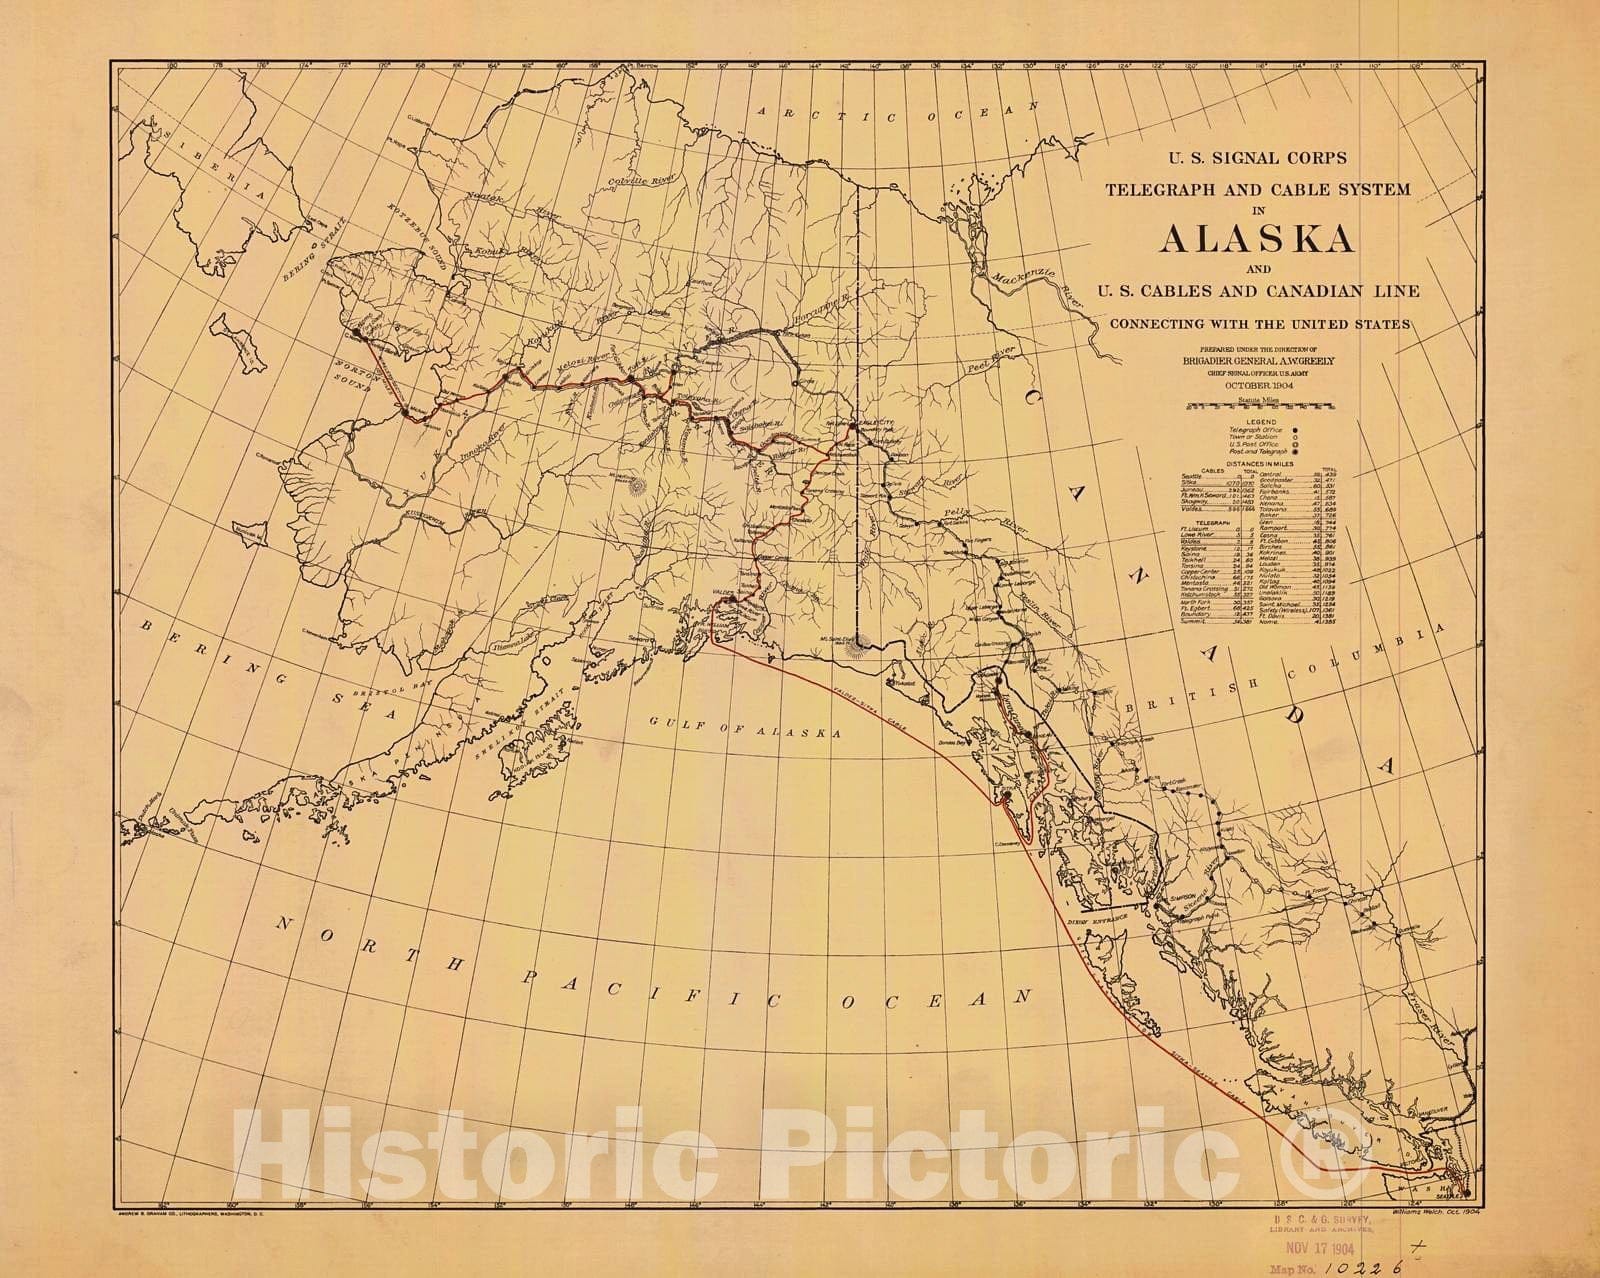 Historic Nautical Map - U.S S Ignal Corps Telegraph And Cable System Of Alaska And U.S. Cables And Canadian Line Connecting With The United States, 1904 AK - Vintage Wall Art